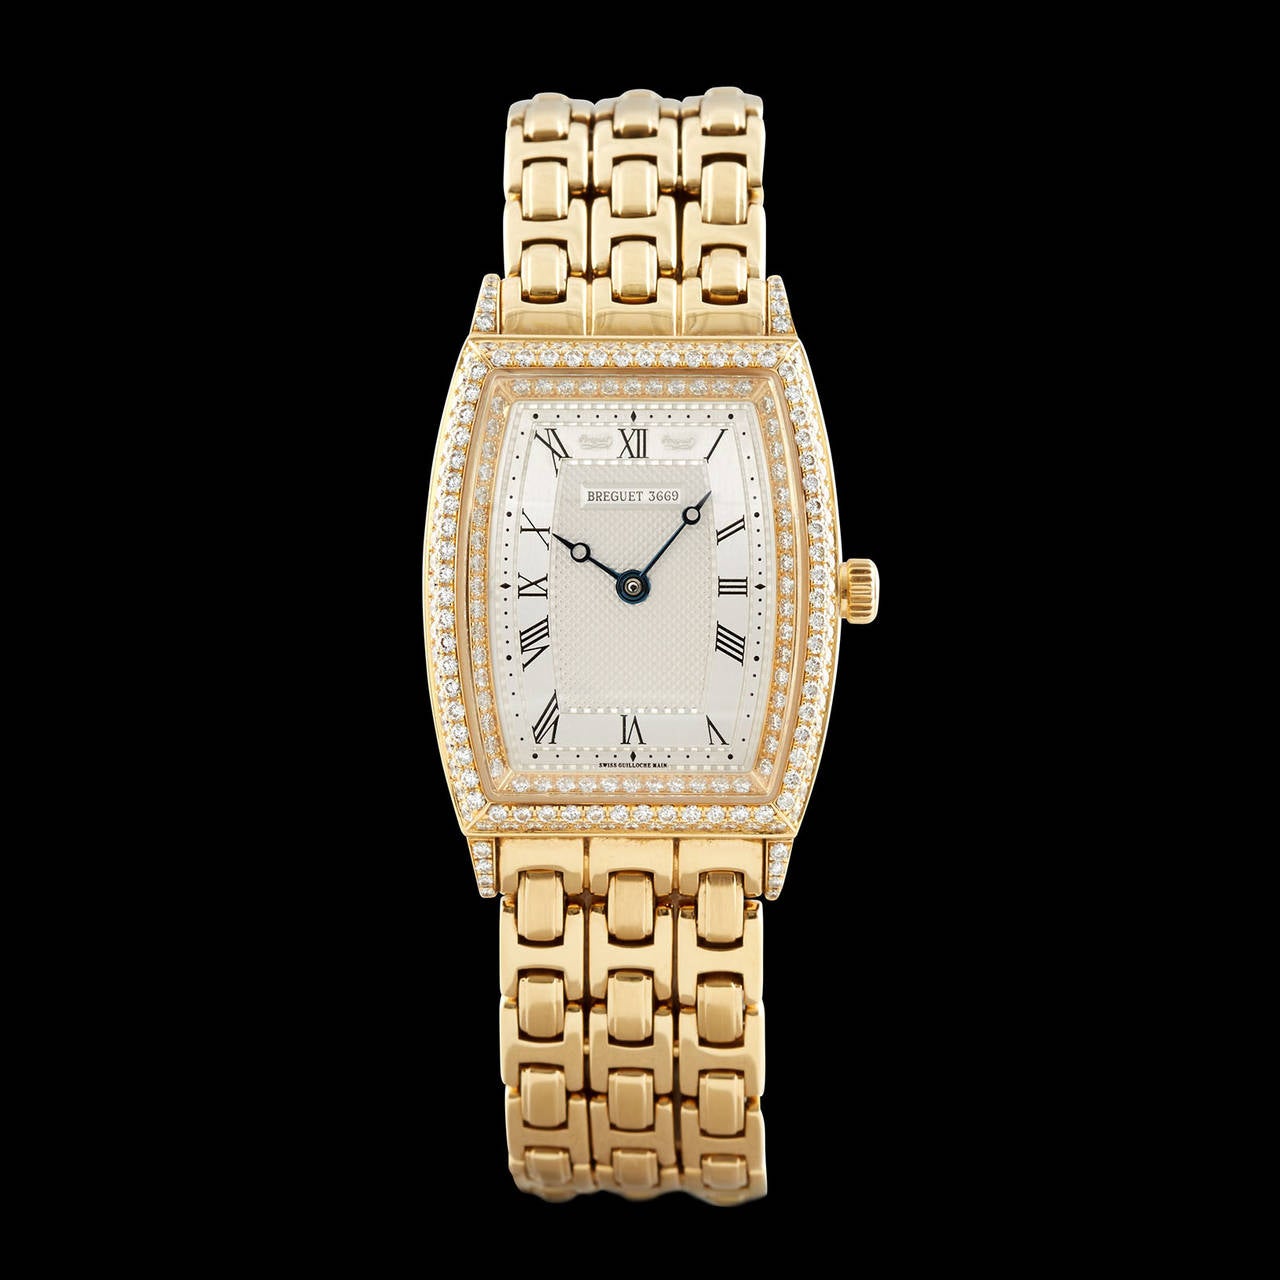 Breguet 18Kt Yellow Gold Women's Watch Features 202 Round Brilliant Cut Diamonds Around the Bezel for Approximately 2.00 Carat Total Weight. The case measures 38mm x 25mm on a 6.5 inch bracelet. This piece is accompanied by the Breguet Certificate